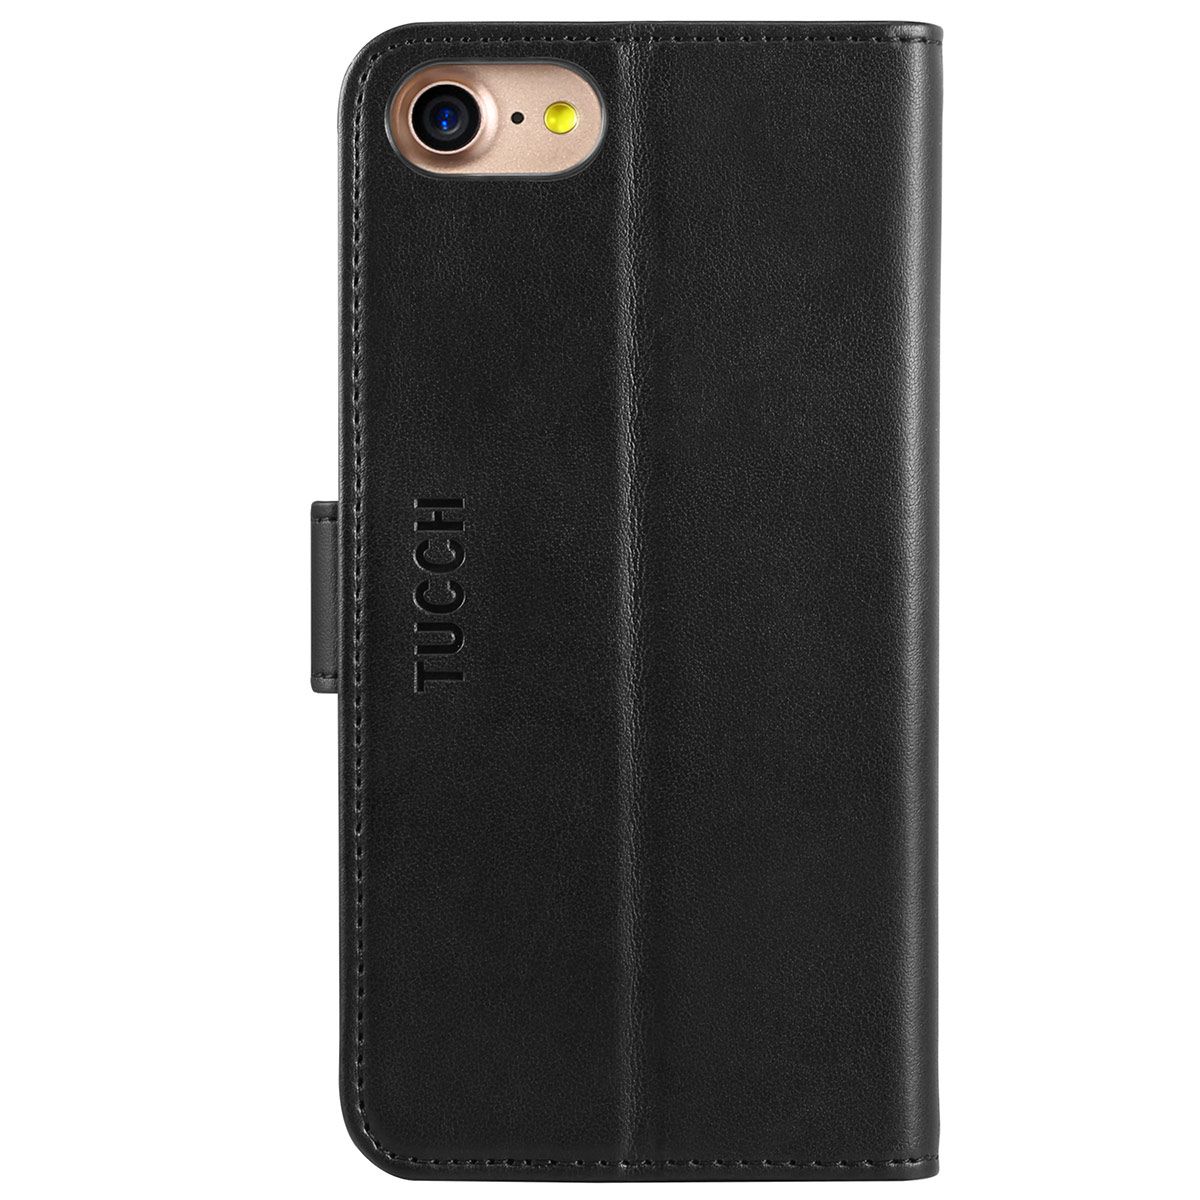 TUCCH Wallet Case for iPhone SE 2022/SE 2020/iPhone 8/7, Premium PU Leather  Folio Case with Stand Ca…See more TUCCH Wallet Case for iPhone SE 2022/SE